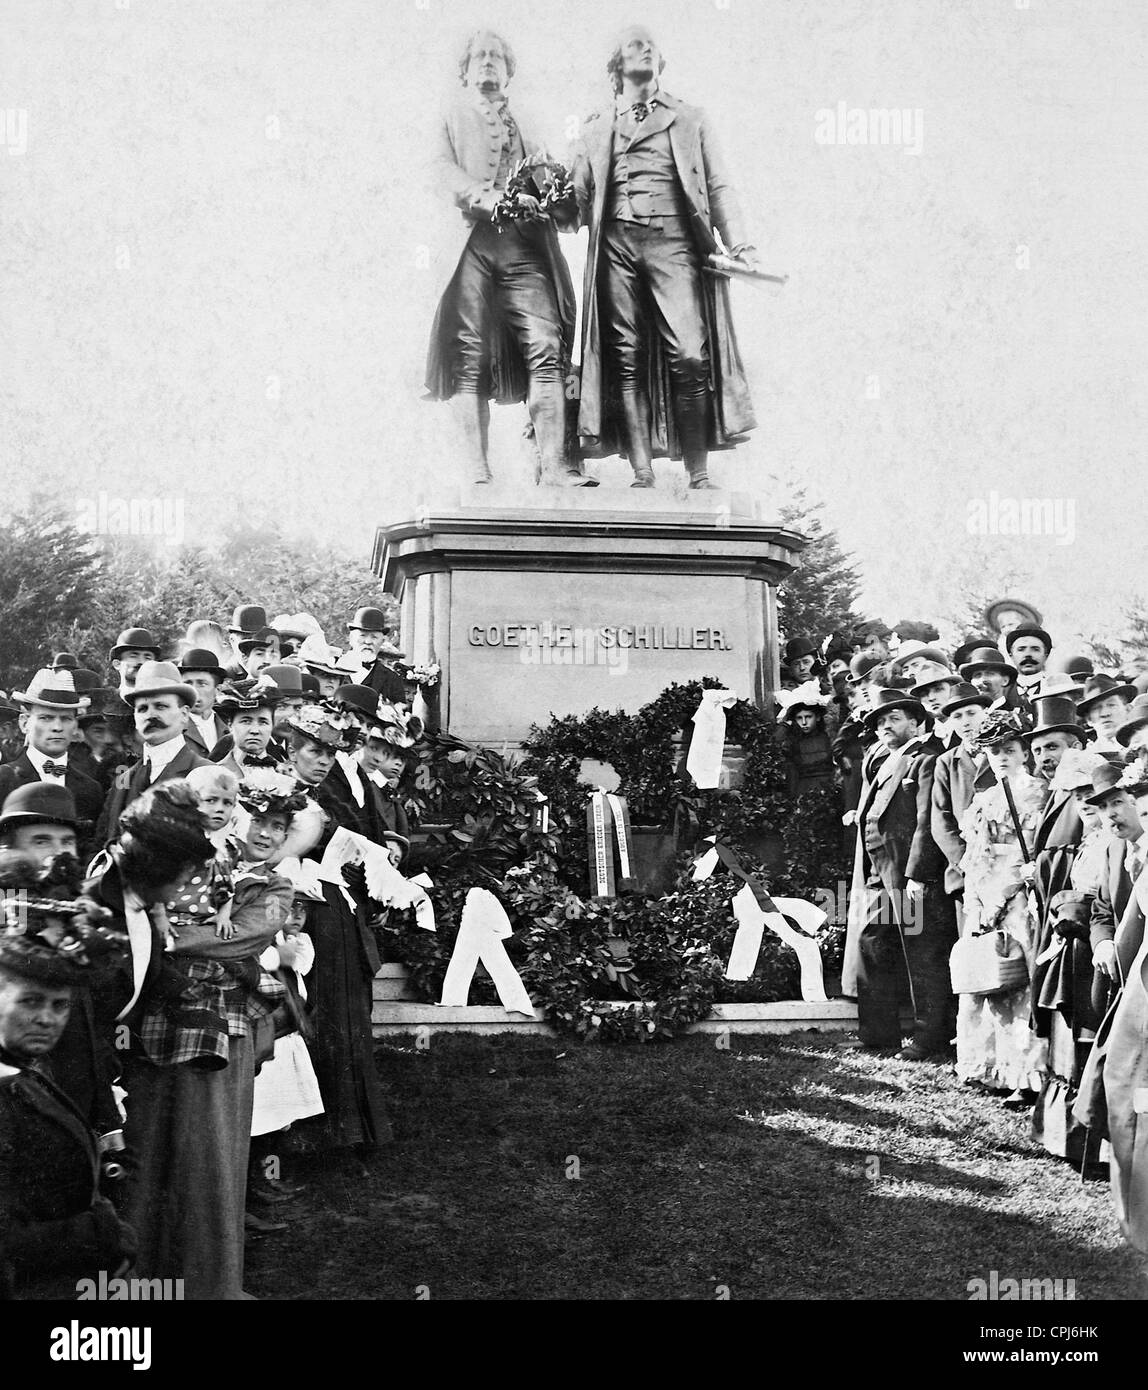 Inauguration of the Goethe-Schiller Monument in San Francisco, 1901 Stock Photo